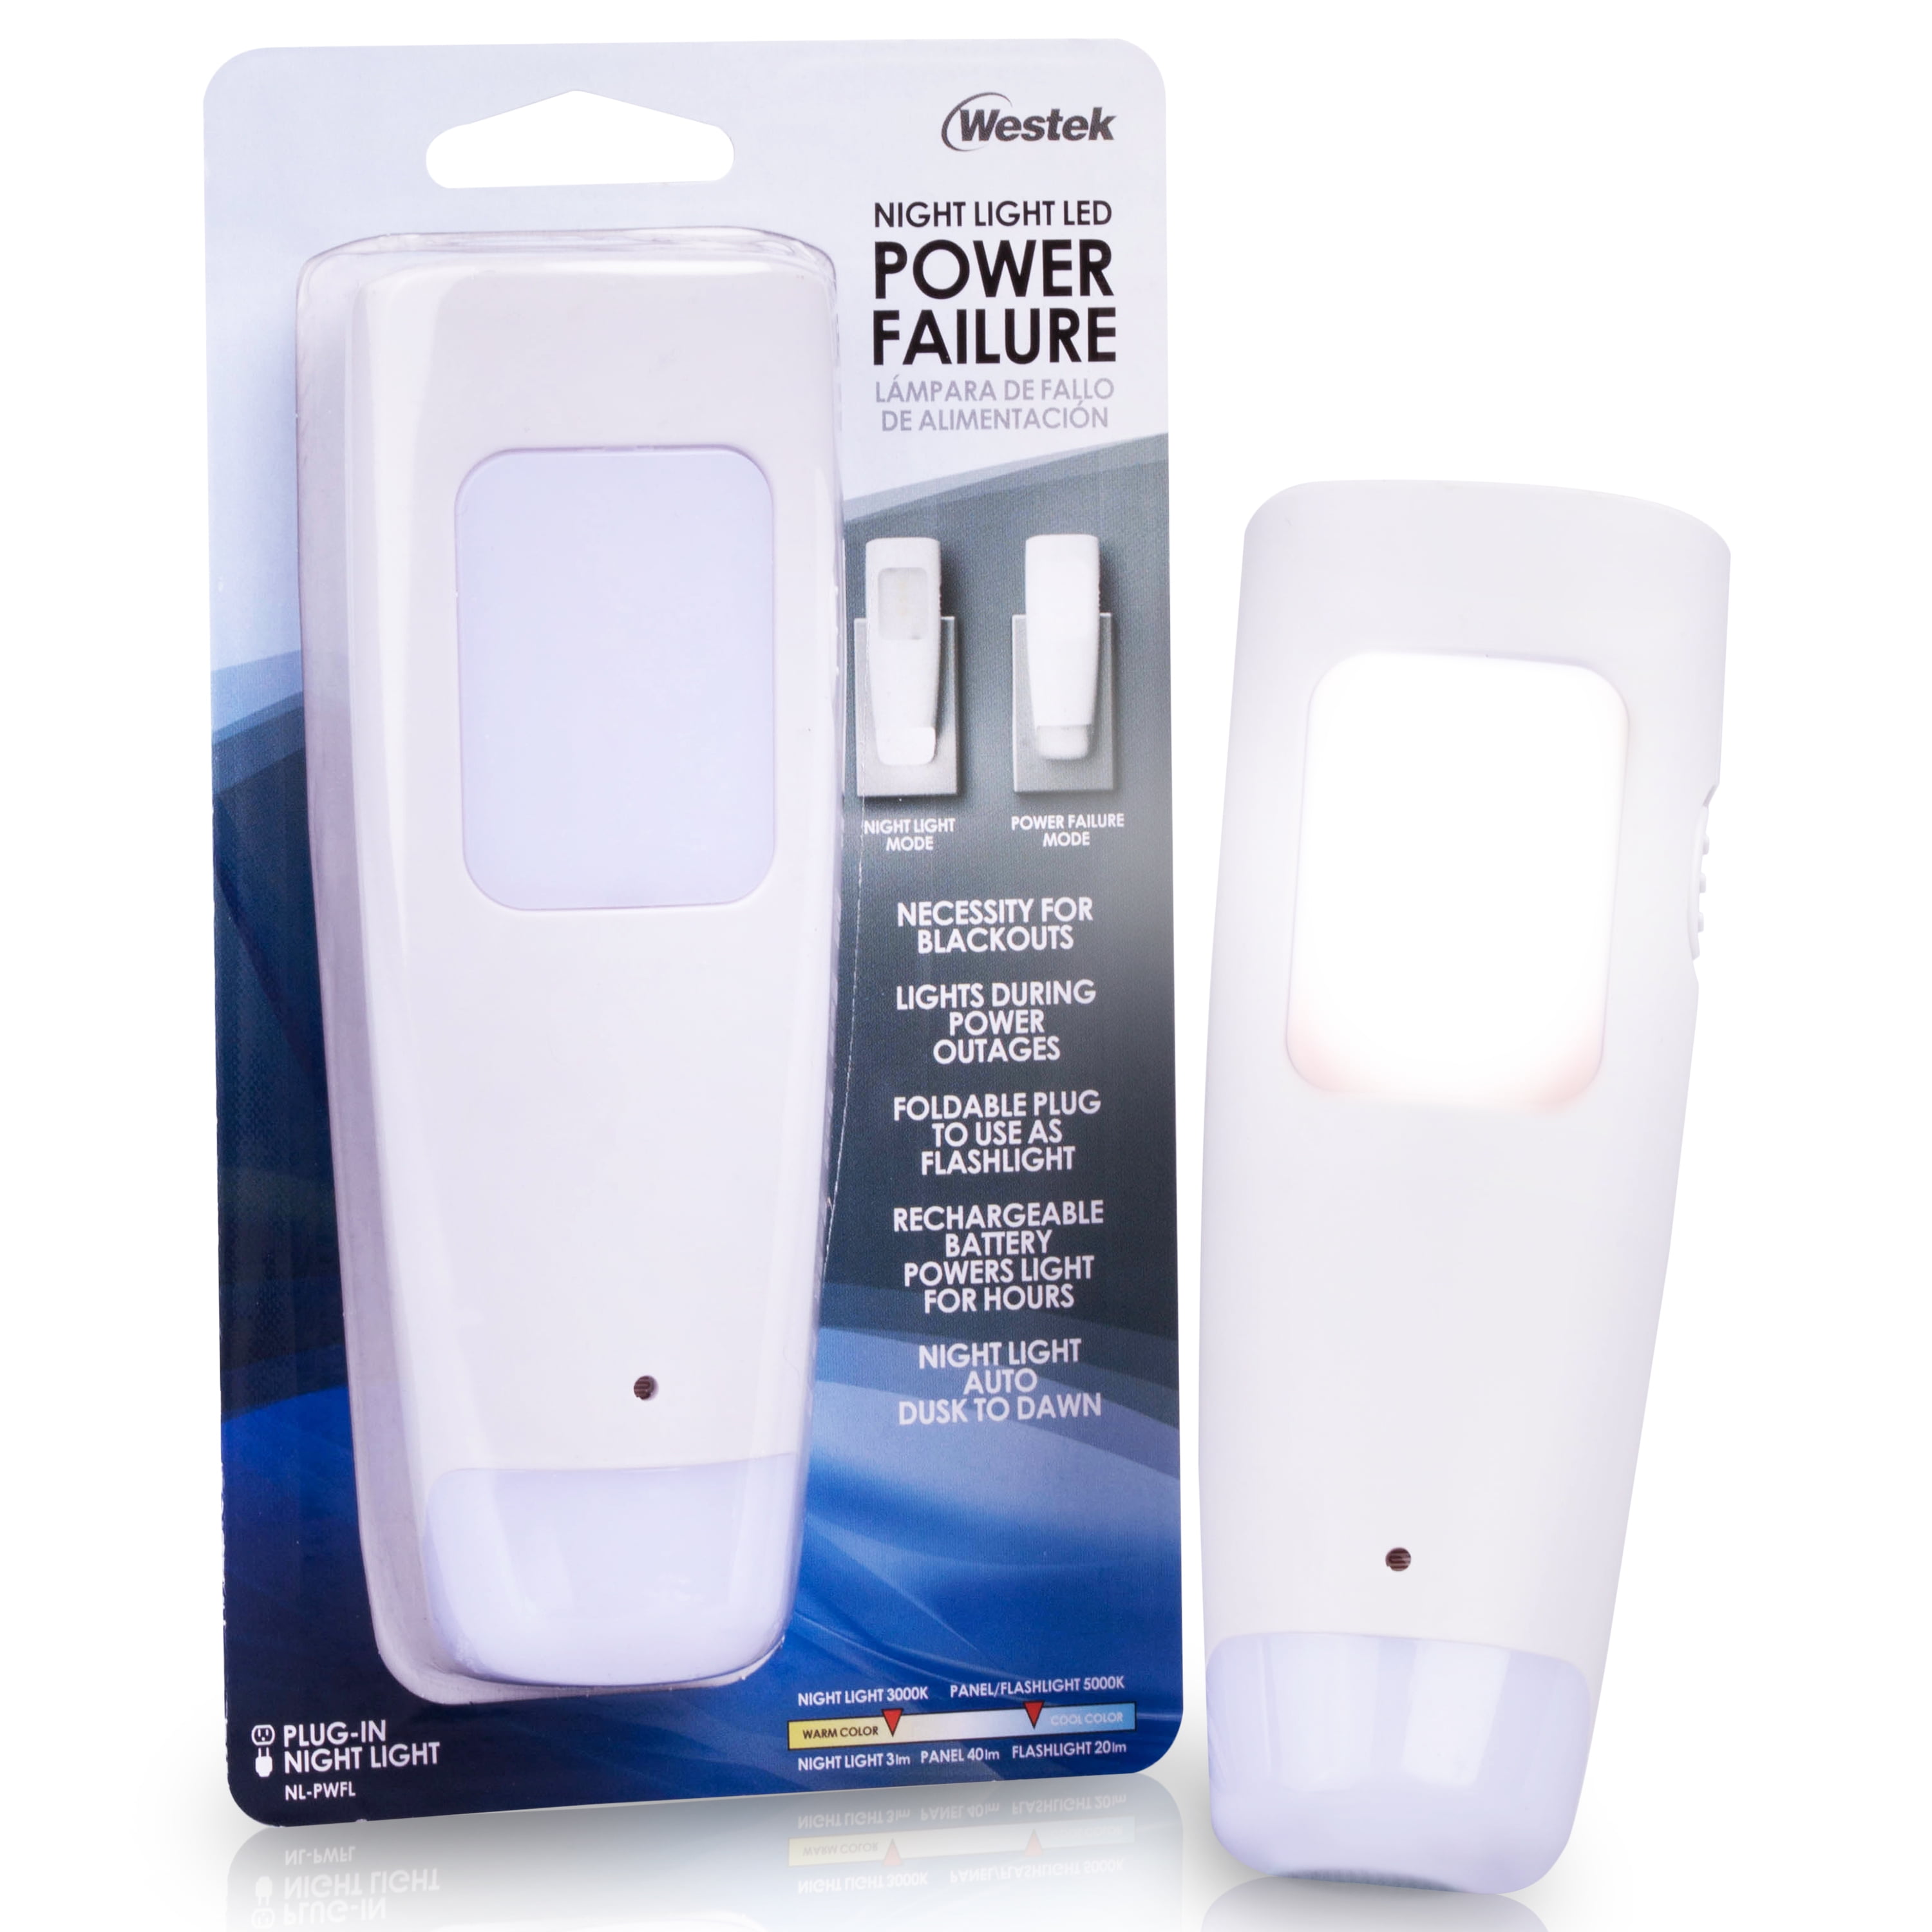 Super Bright Emergency Power Failure Outage Light (21 LEDs) - Lite Saver -  last up to 10 hours 